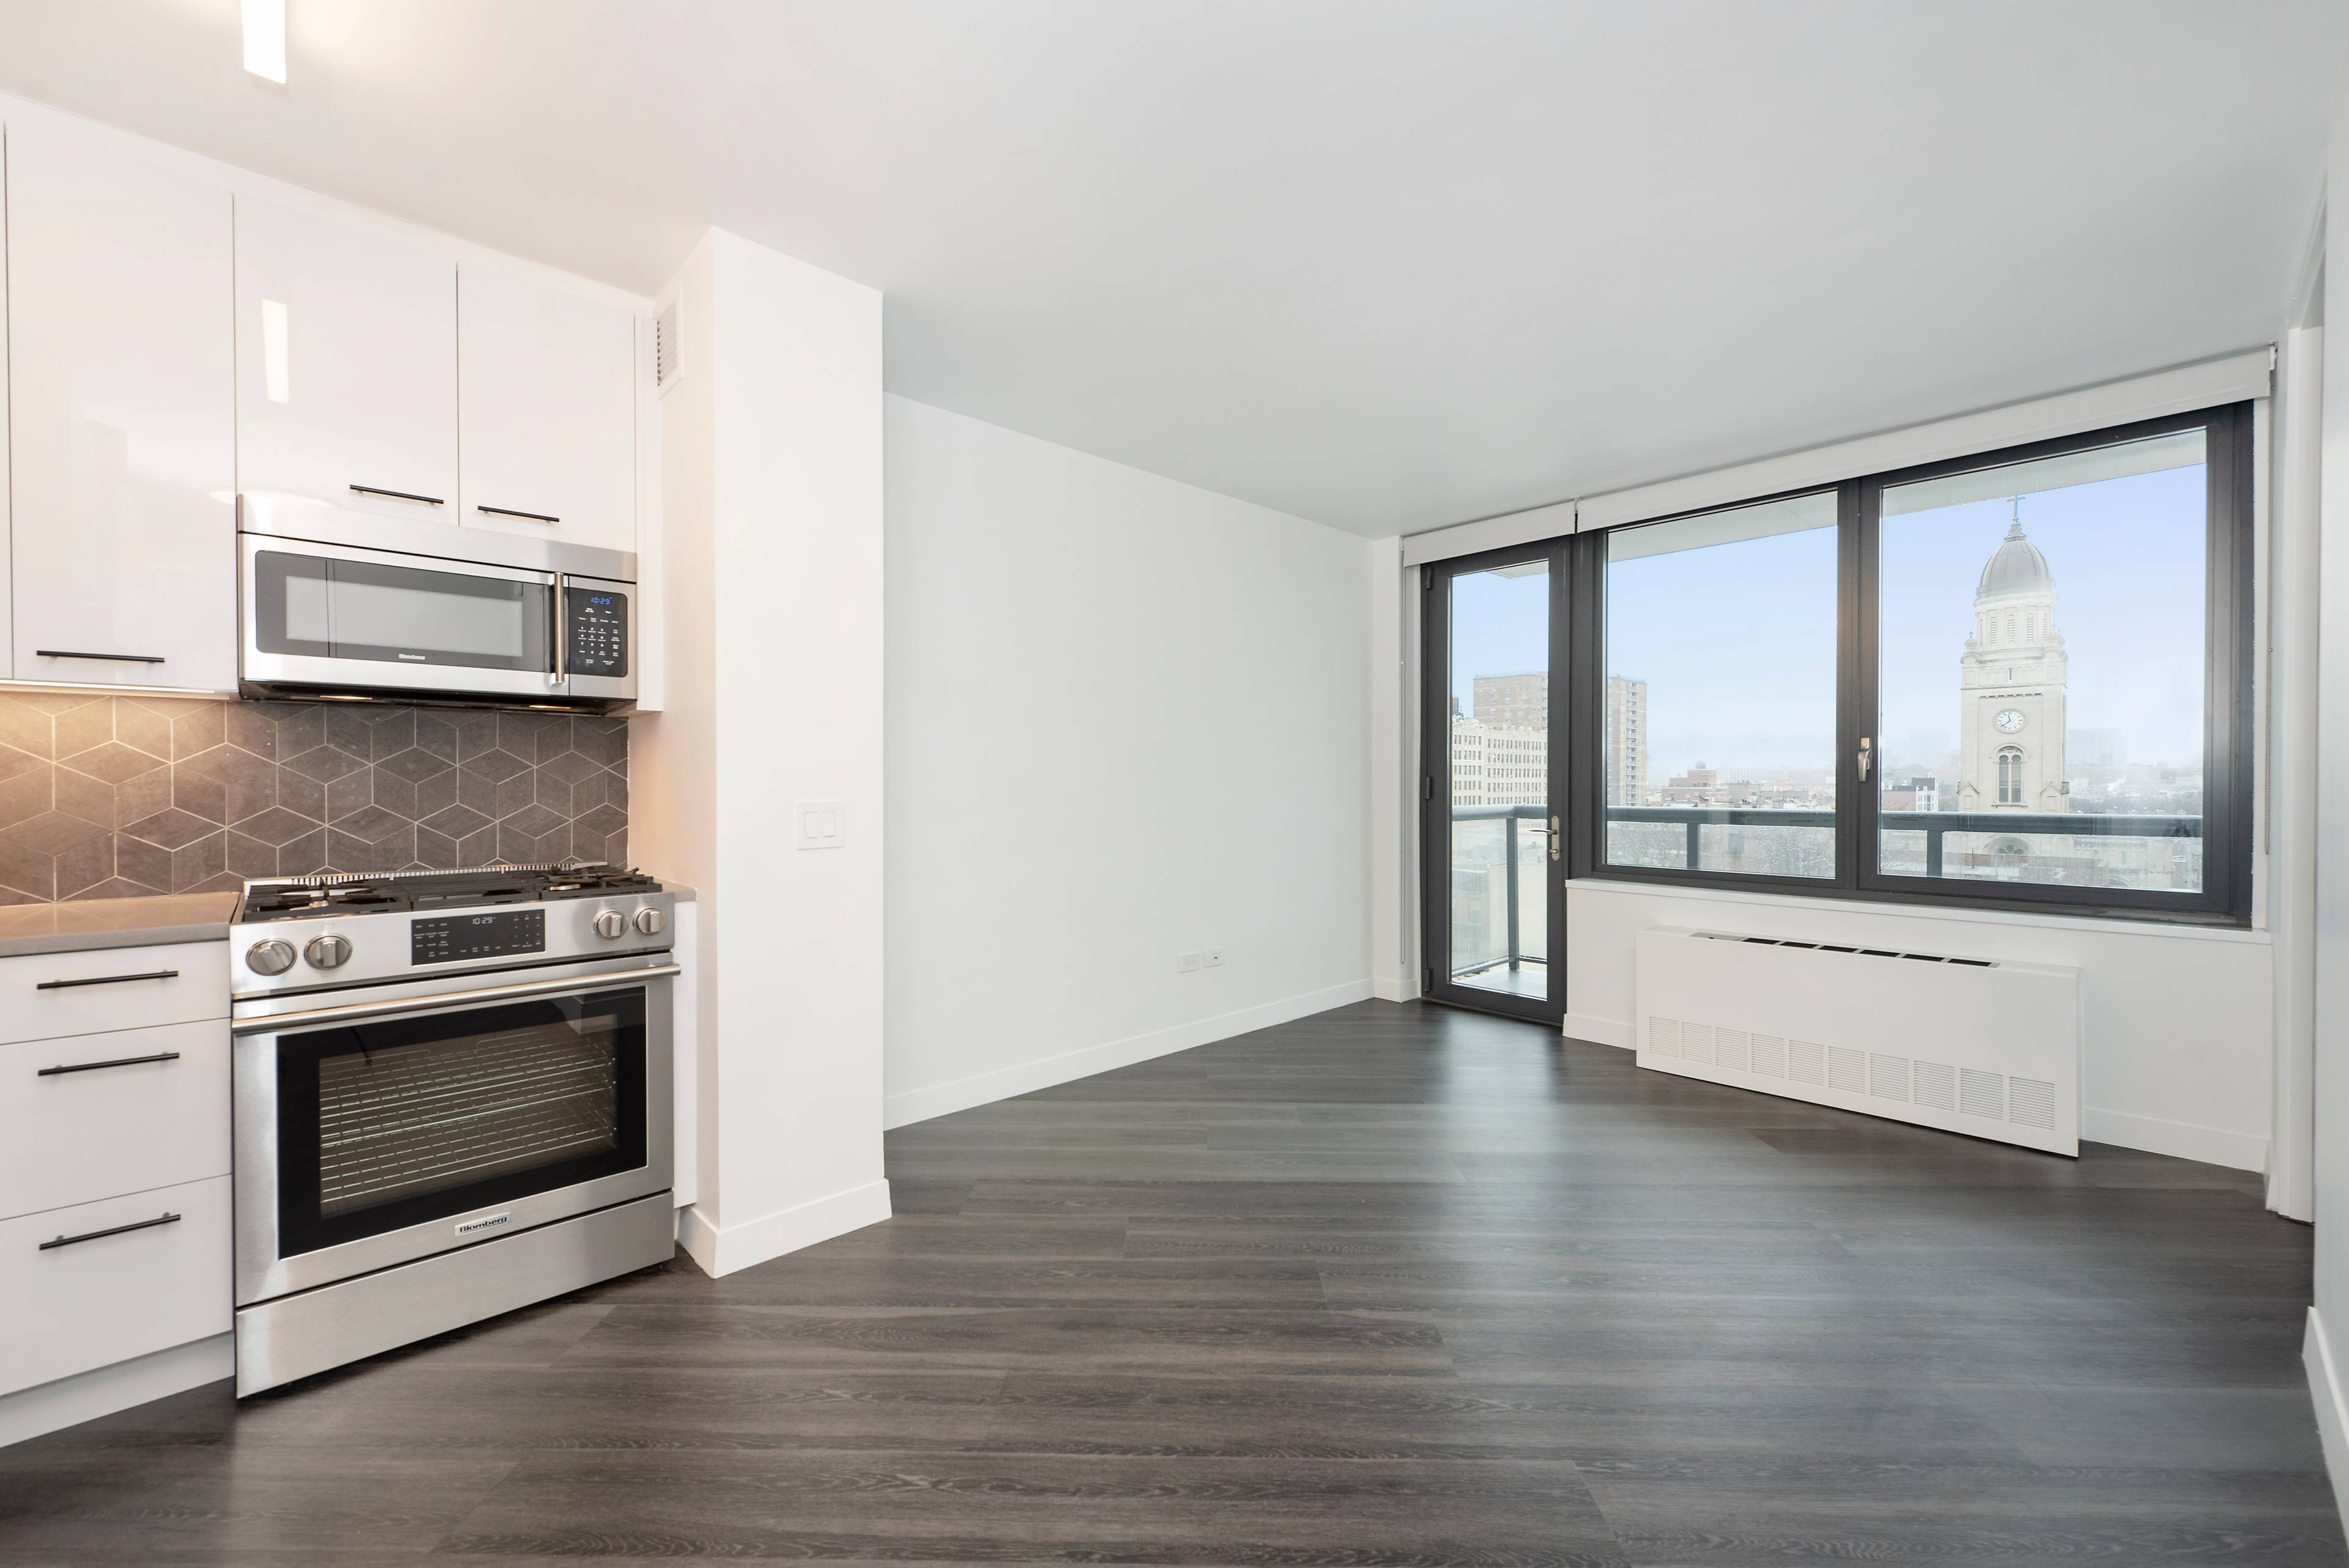 Fully Renovated 1BR 1BA in unit W/D fully equipped Apartment in East Village!